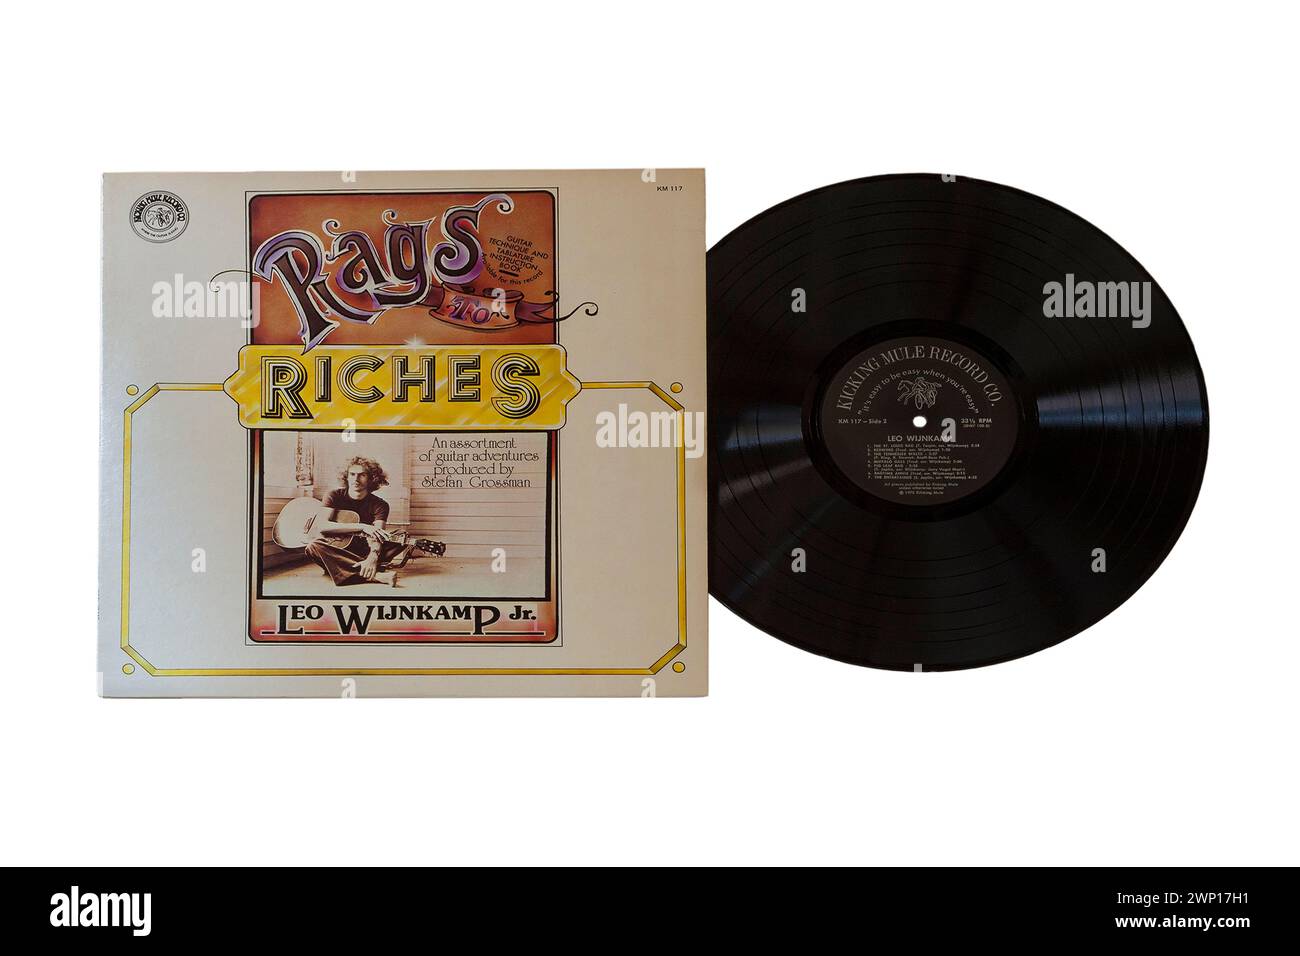 Leo Wijnkamp Jr Rags to Riches vinyl record album LP cover isolated on white background - 1975 - an assortment of guitar adventures Stock Photo